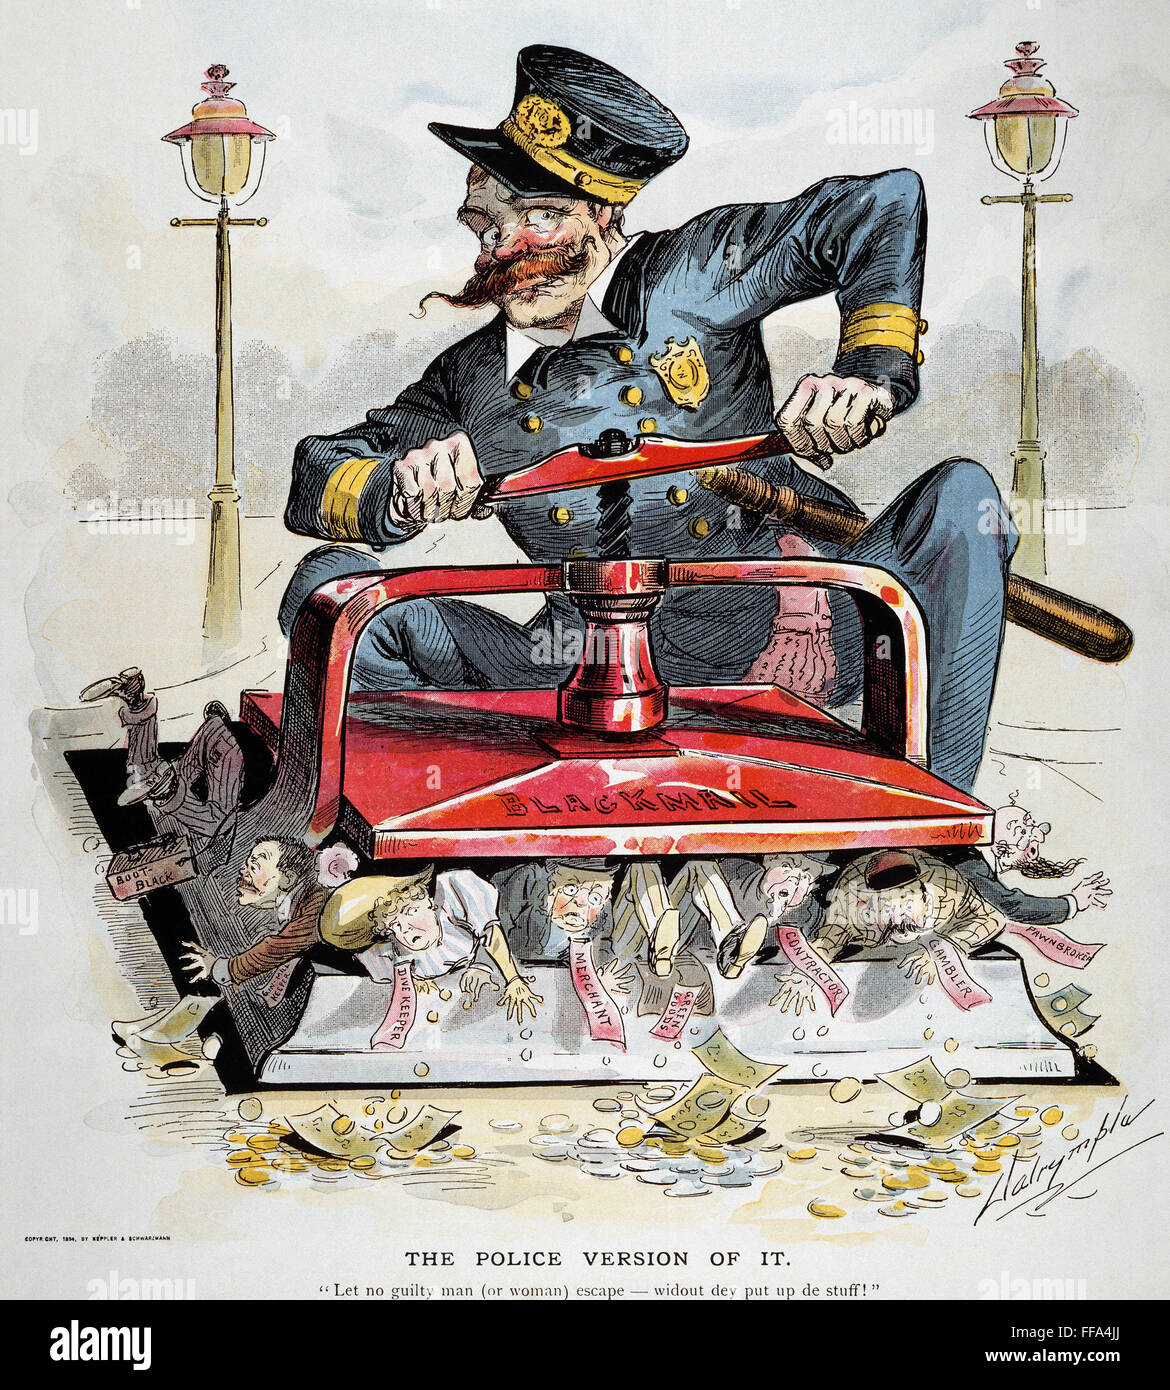 POLICE CORRUPTION CARTOON. /n'The Police Version of It.' American cartoon, 1894, by Louis Dalrymple on police corruption. Stock Photo